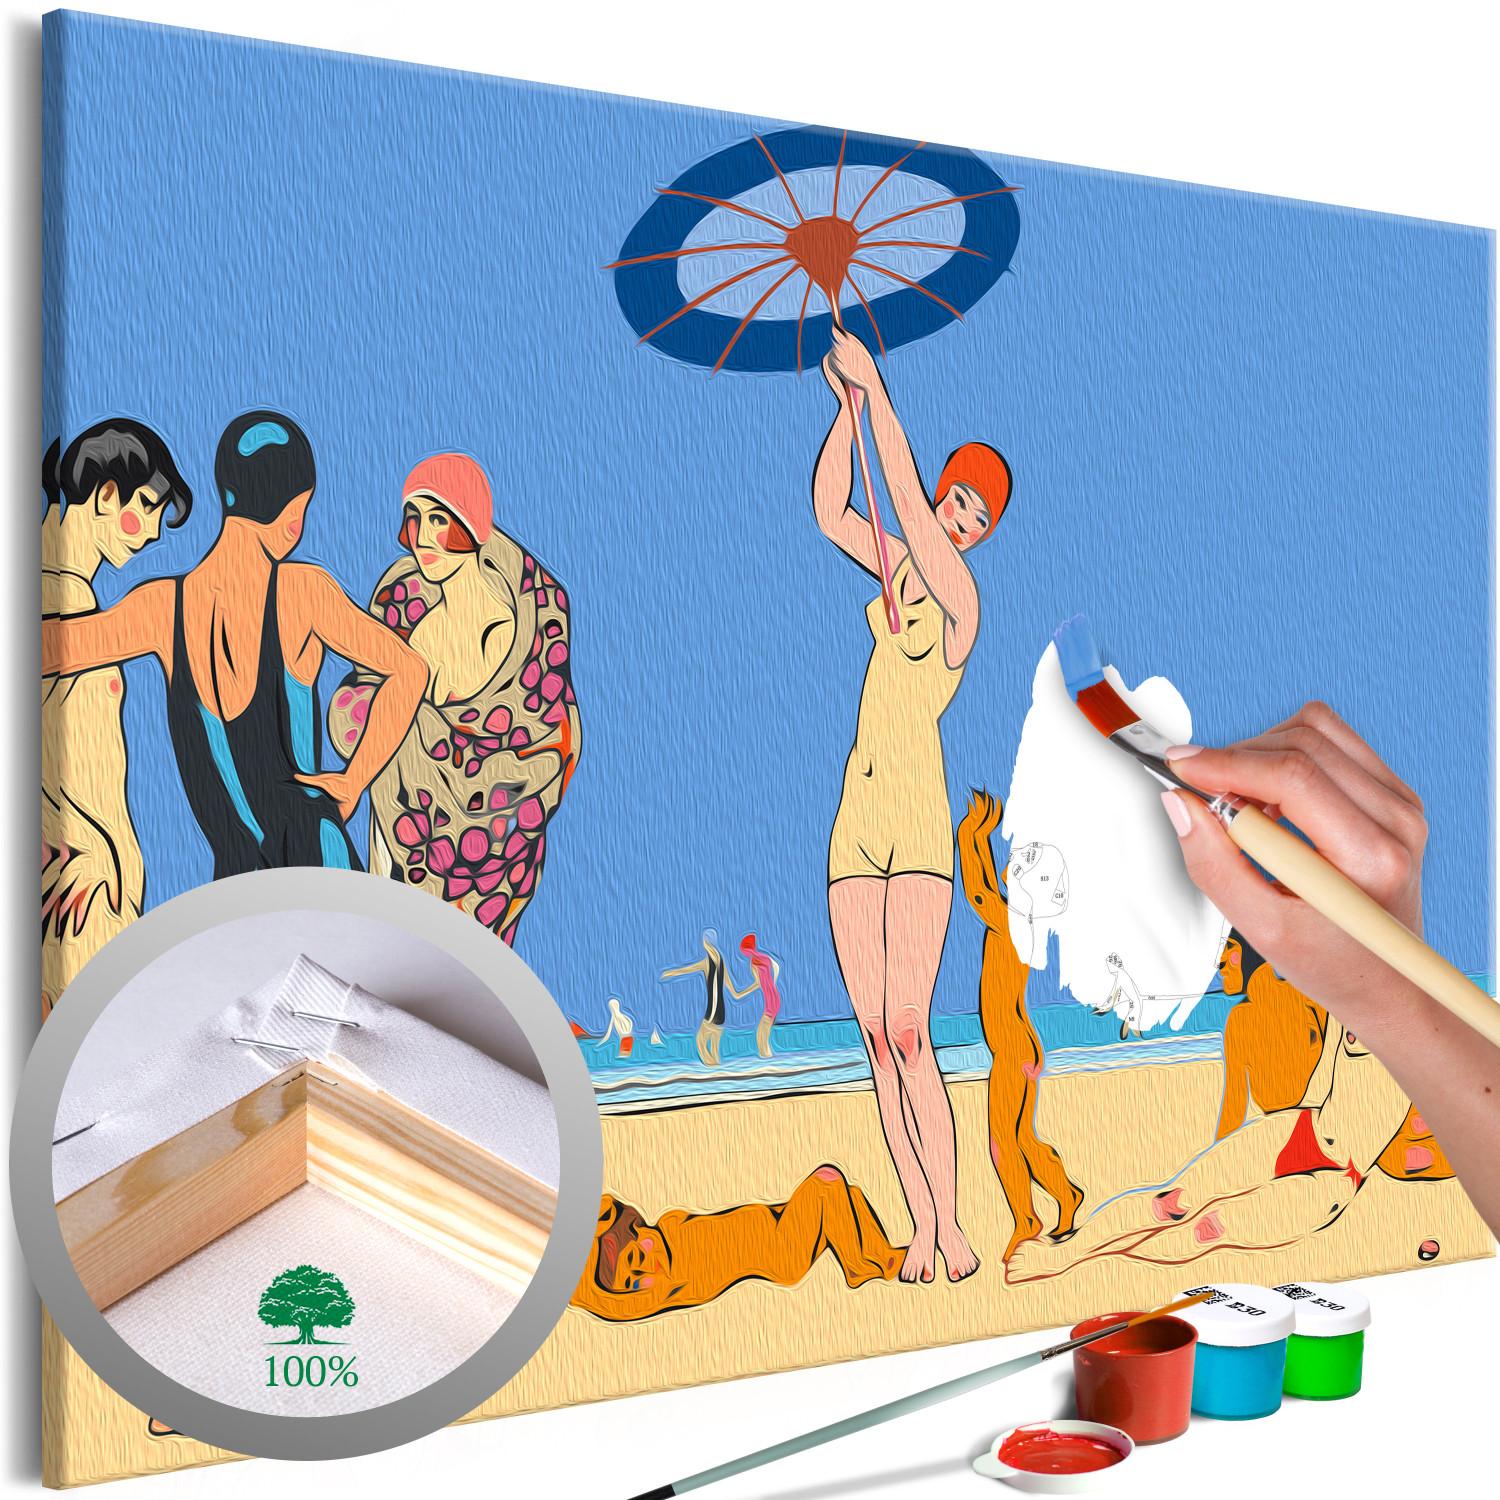 Paint by Number Kit On the Beach - Group of Acquaintances by the Sea, Blue Sky